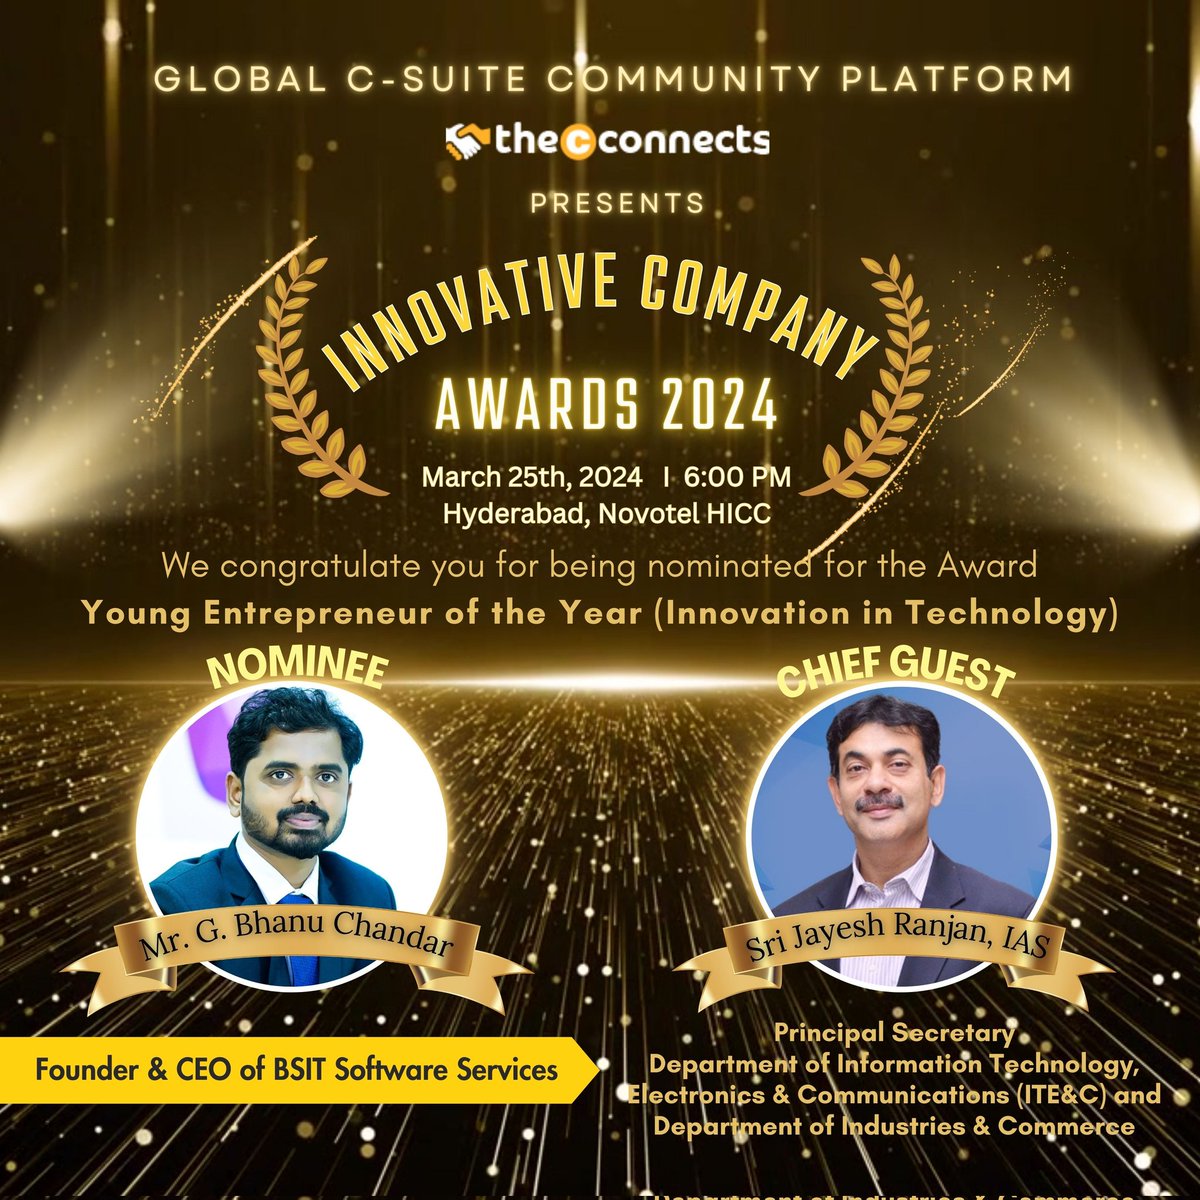 Honored to be recognized as the Young Entrepreneur of the Year! This award is a reflection of the passion, determination, and resilience that drives me and my team. 
#bhanuchandargarigela #sharadanenavath #bsitsoftware
#YoungEntrepreneur #InnovativeCompany #EntrepreneurshipAward